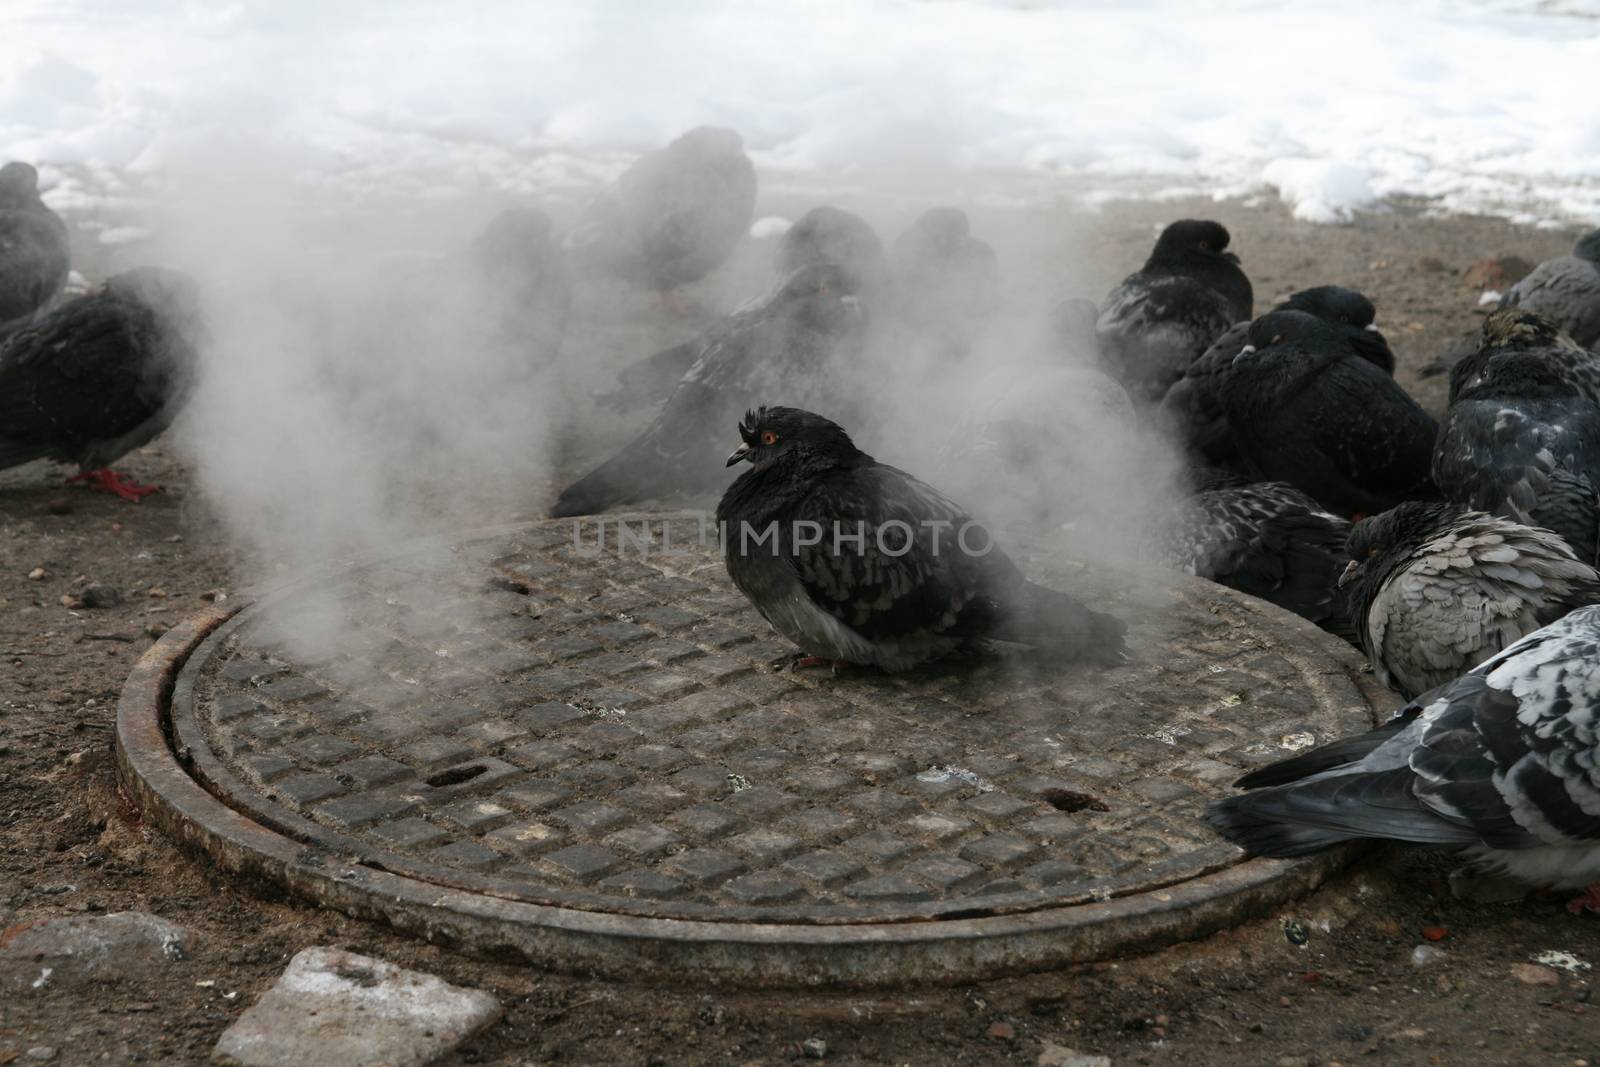 Urban pigeons warm in the winter next to the manhole by MichalLudwiczak